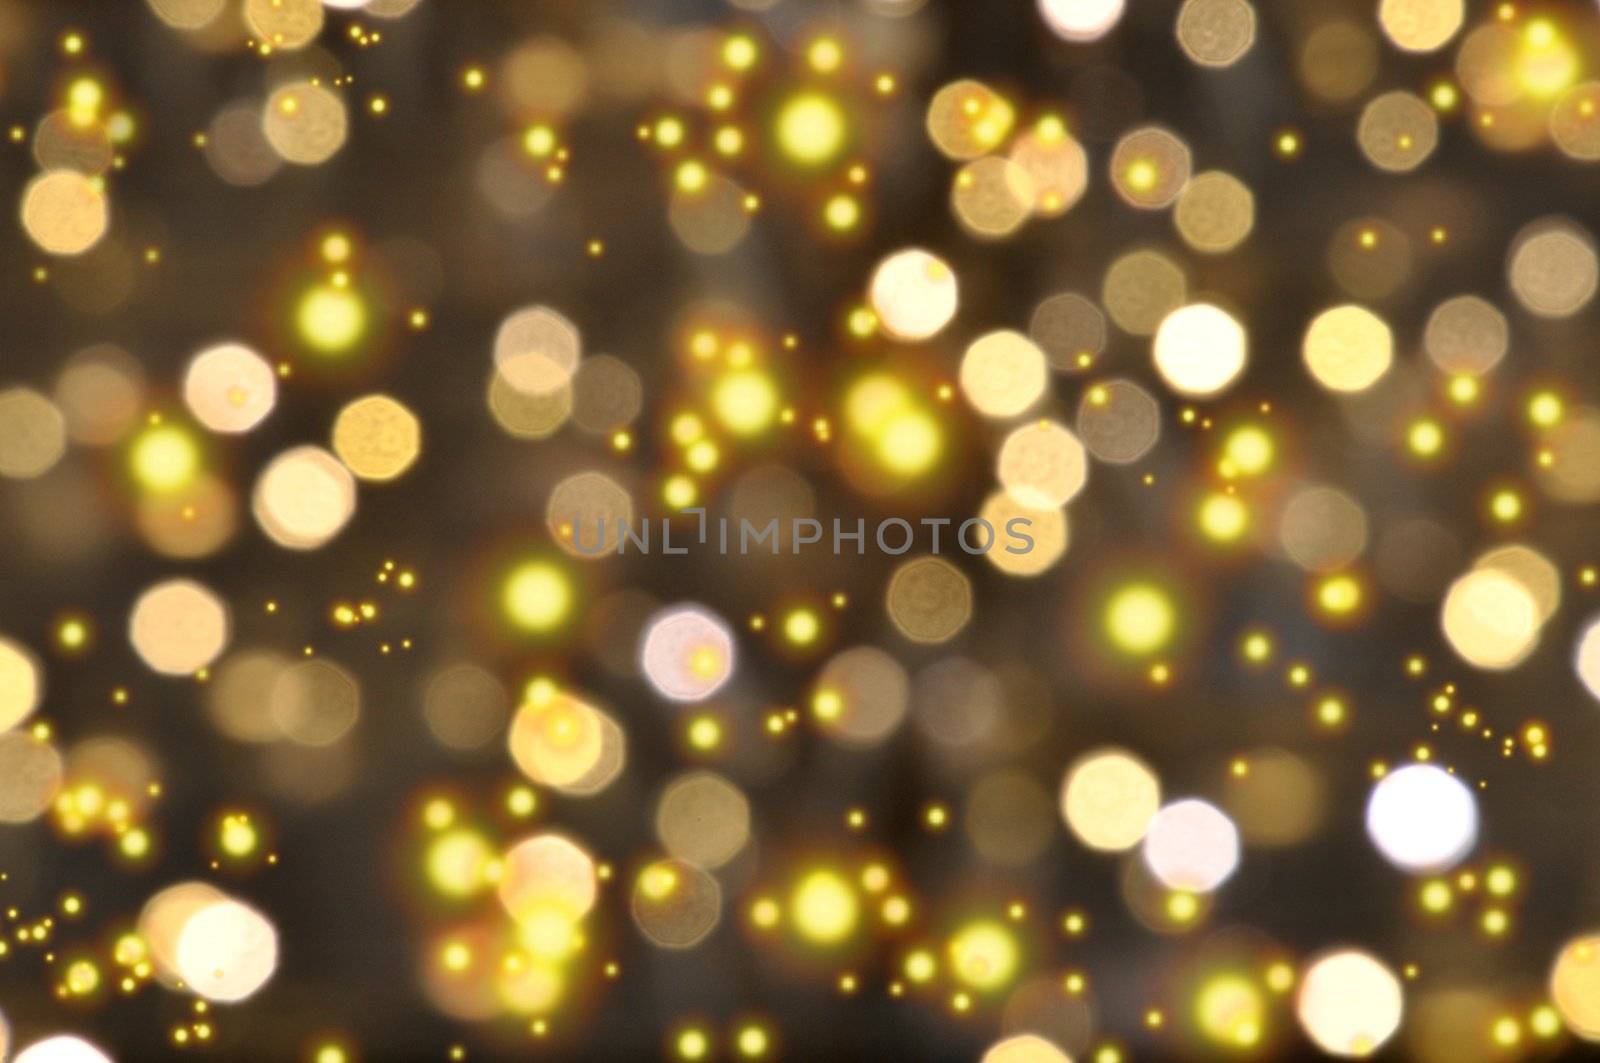 Golden background, perfect for Christmas or New Year's Eve